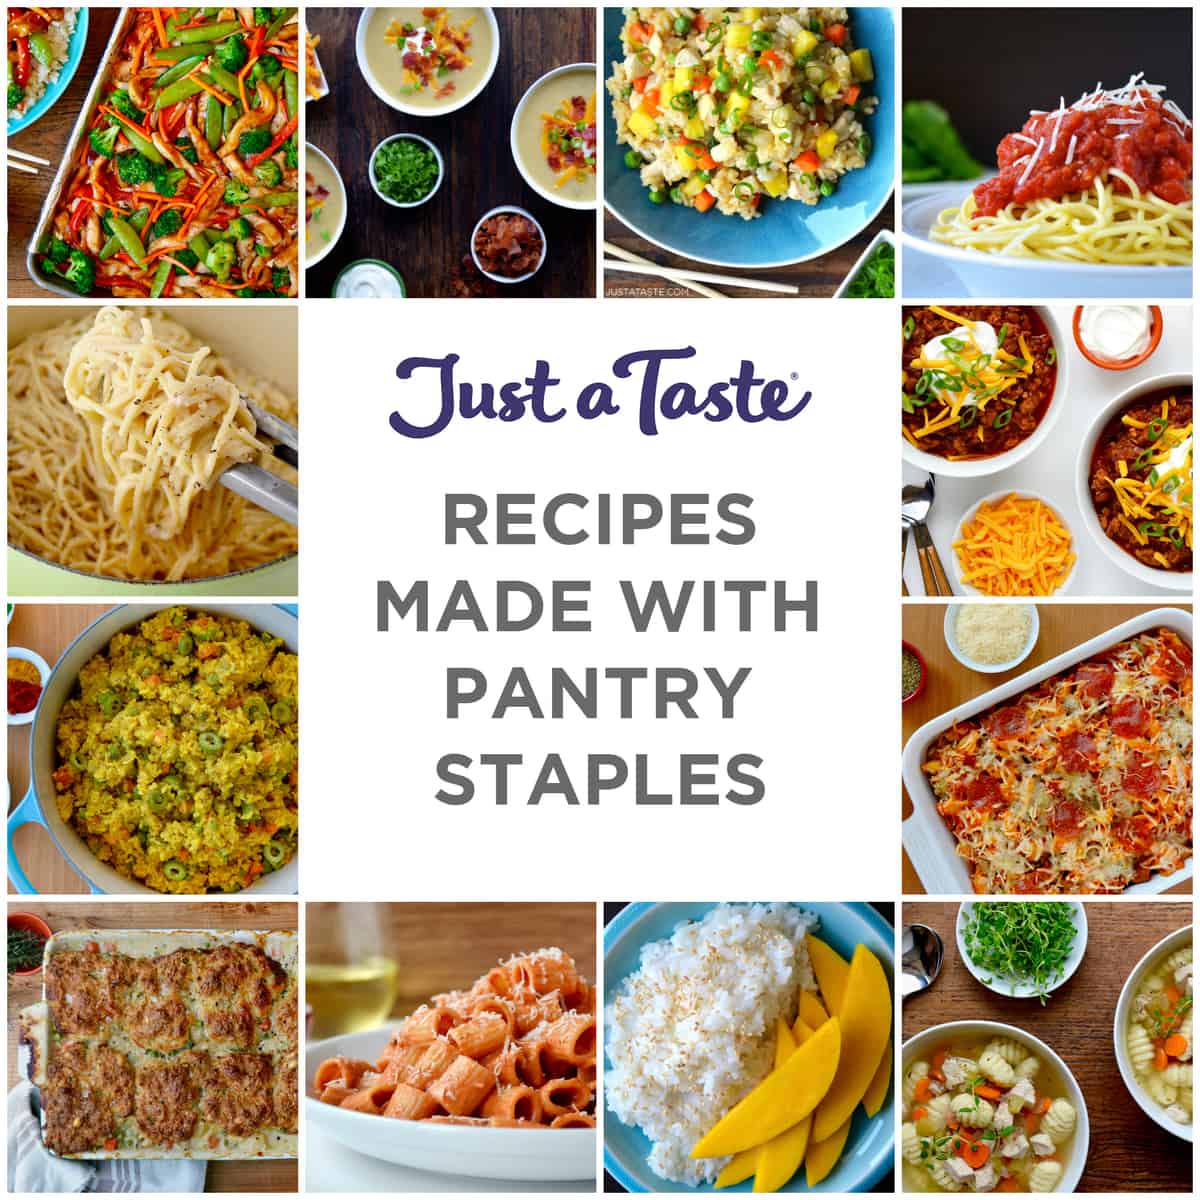 A collage of recipes all made with pantry staples.